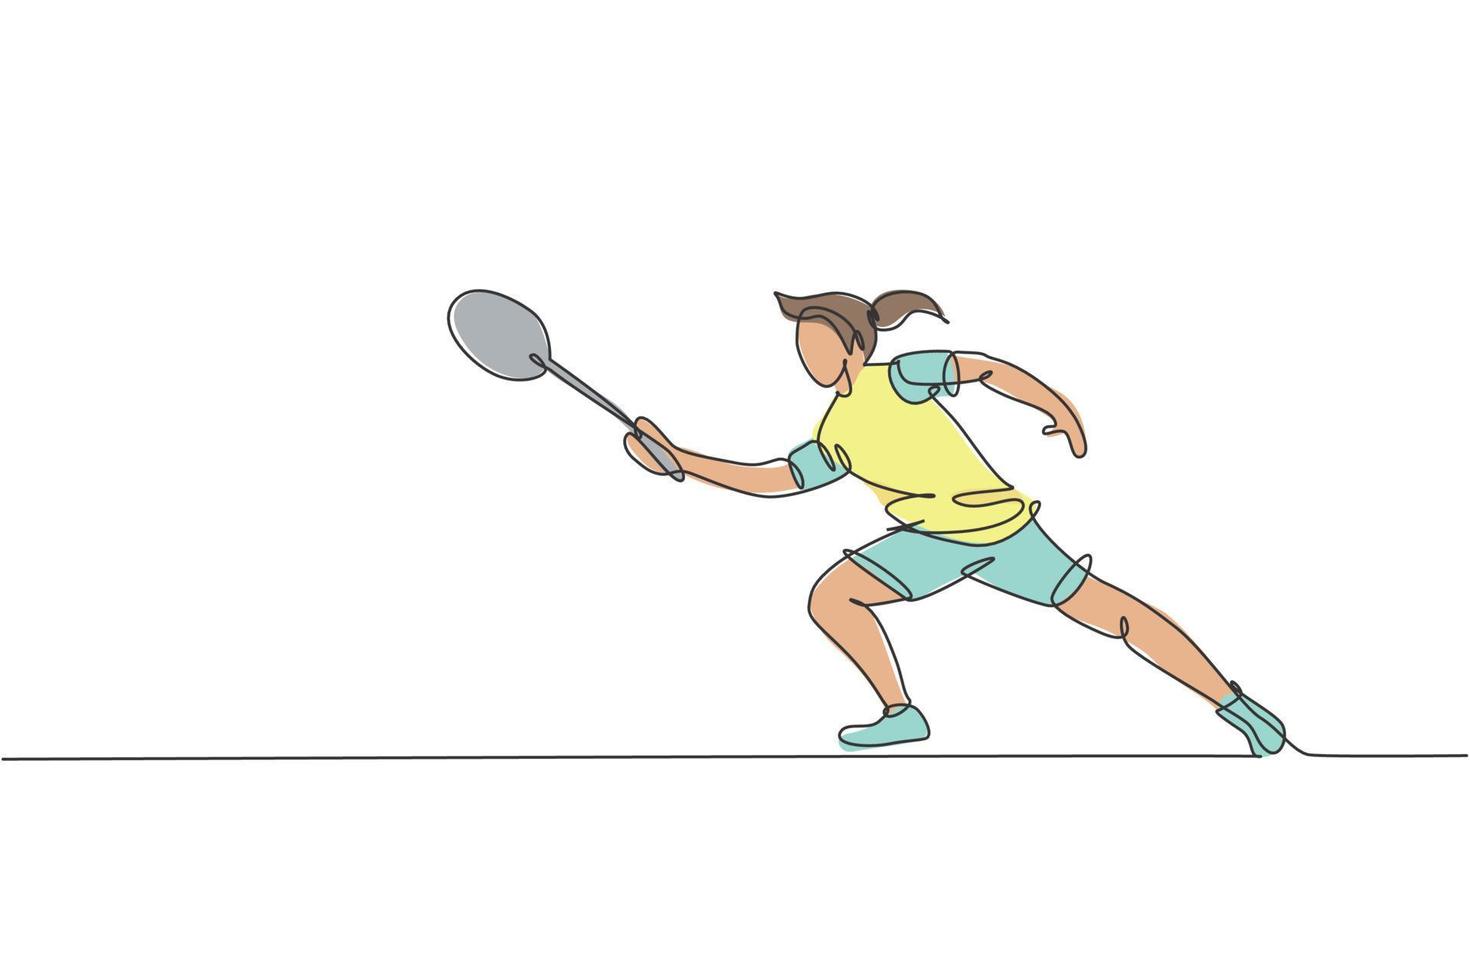 Single continuous line drawing young agile badminton player hit shuttlecock. Sport exercise concept. Trendy one line draw design vector illustration graphic for badminton tournament publication media